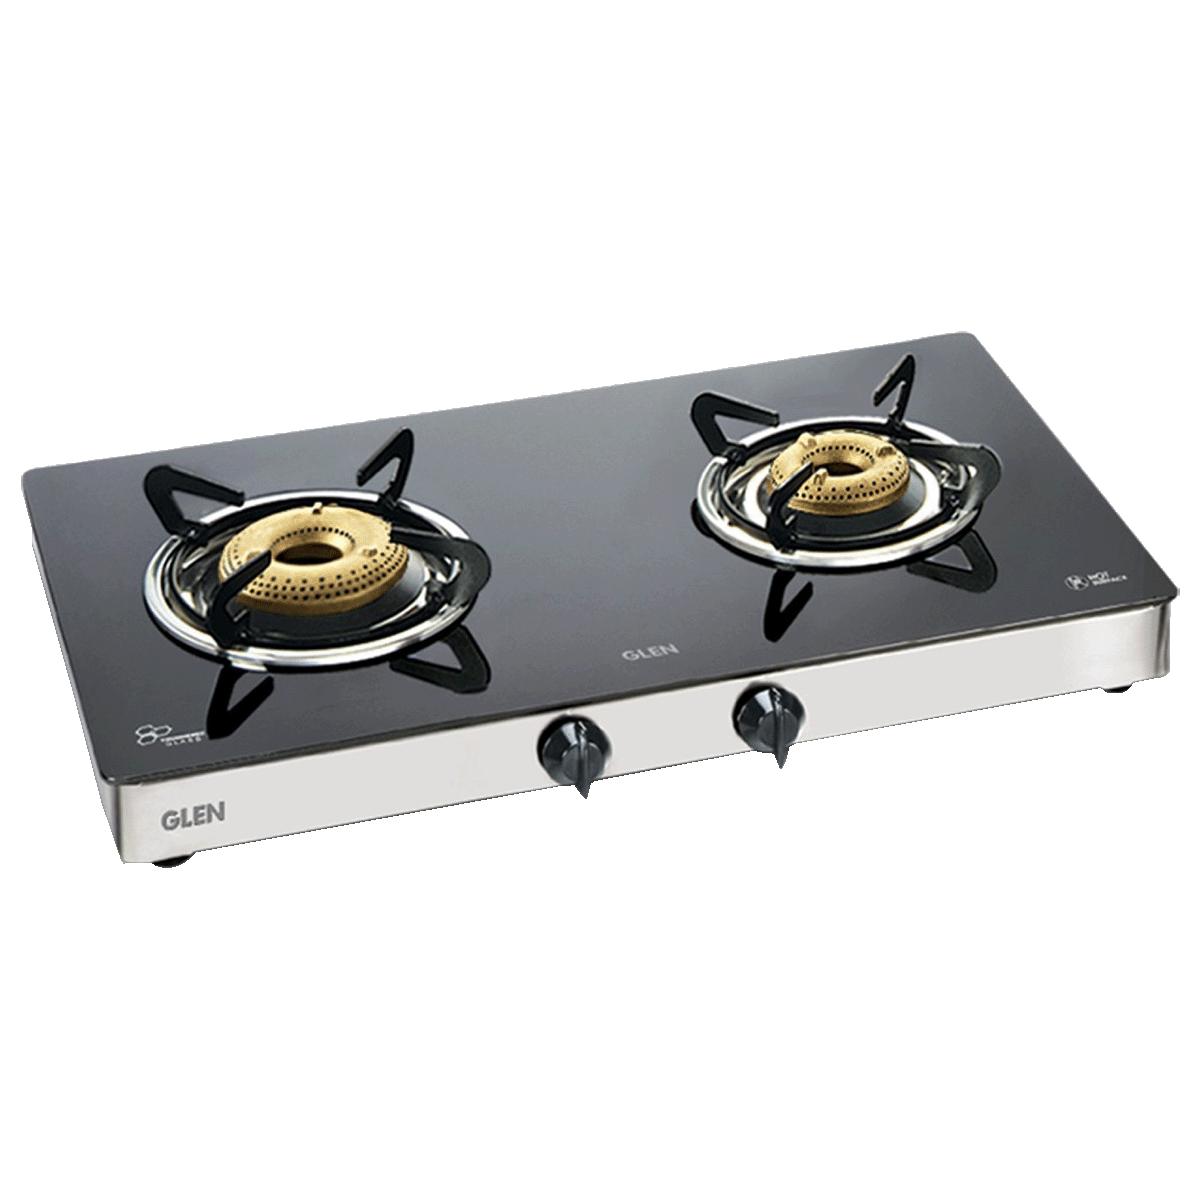 Glen 1021 GT 2 Burner Toughened Glass Gas Stove (Sturdy Pan Supports, CT1021GTFBHF, Black)_1